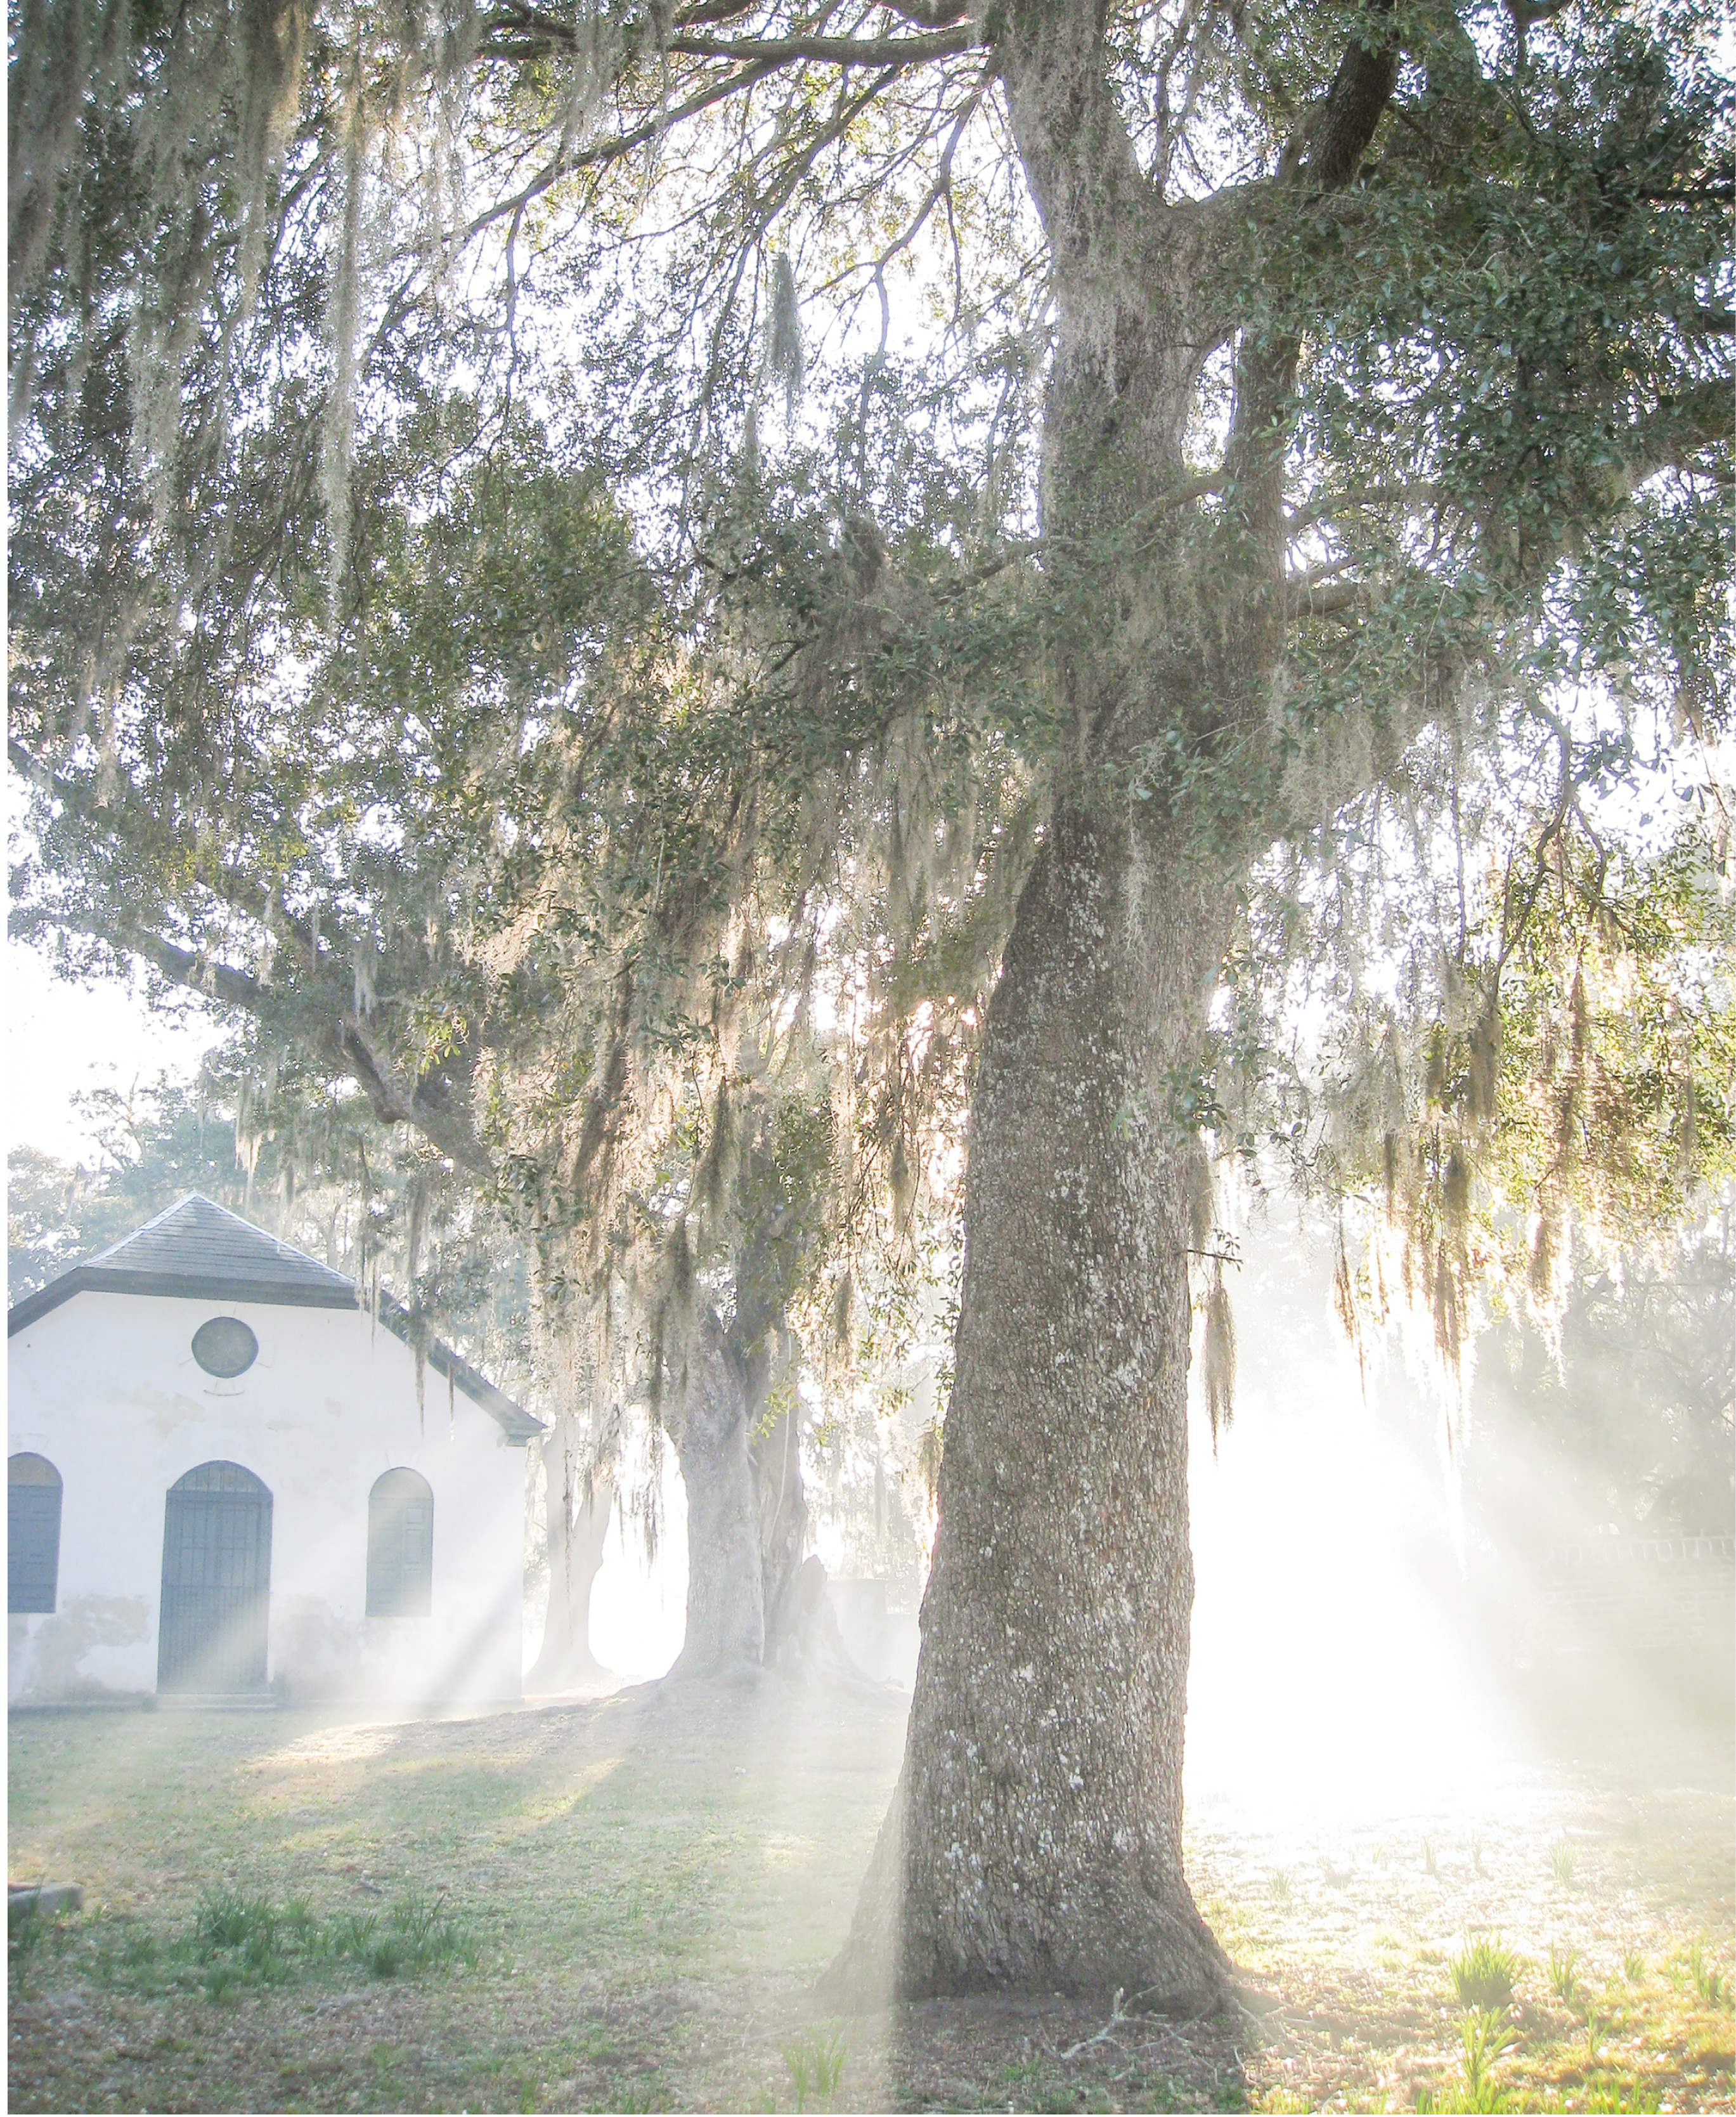 The circa-1725 Strawberry Chapel-of-Ease in Berkeley County